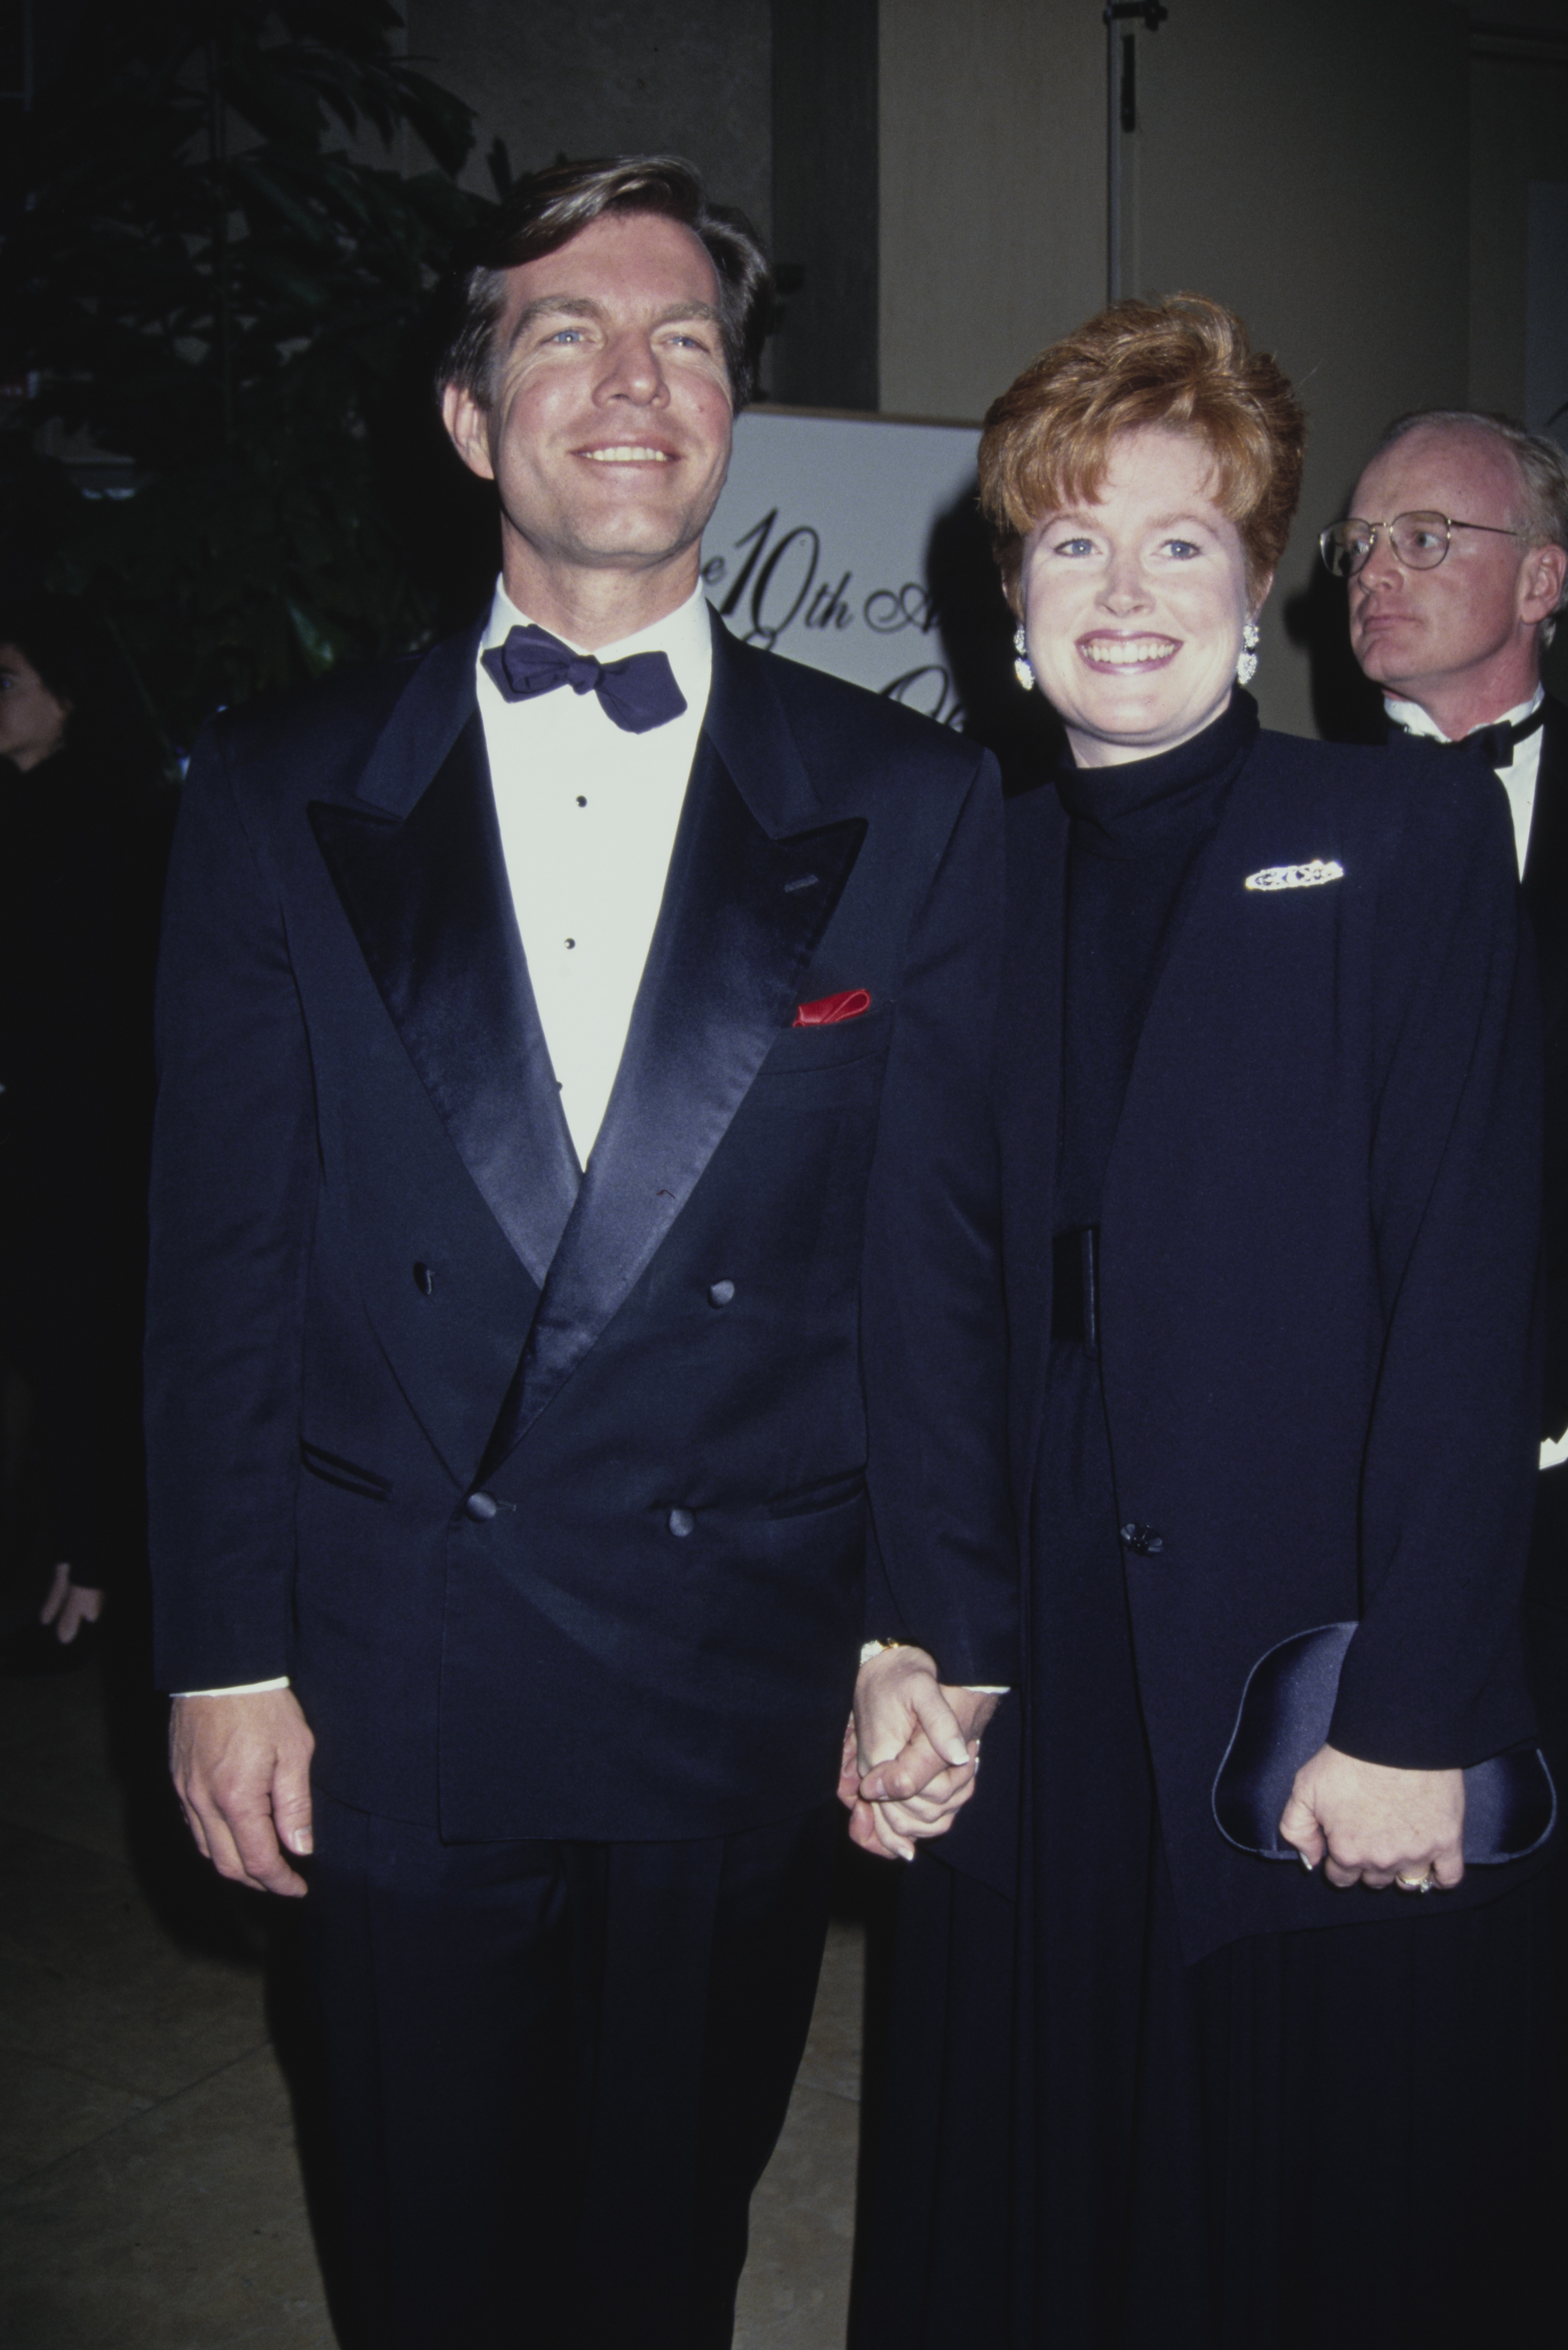 Peter Bergman and his wife, Mariellen Bergman, at the 10th Annual Soap Opera Digest Awards in Beverly Hills, California, February 4, 1994 | Source: Getty Images